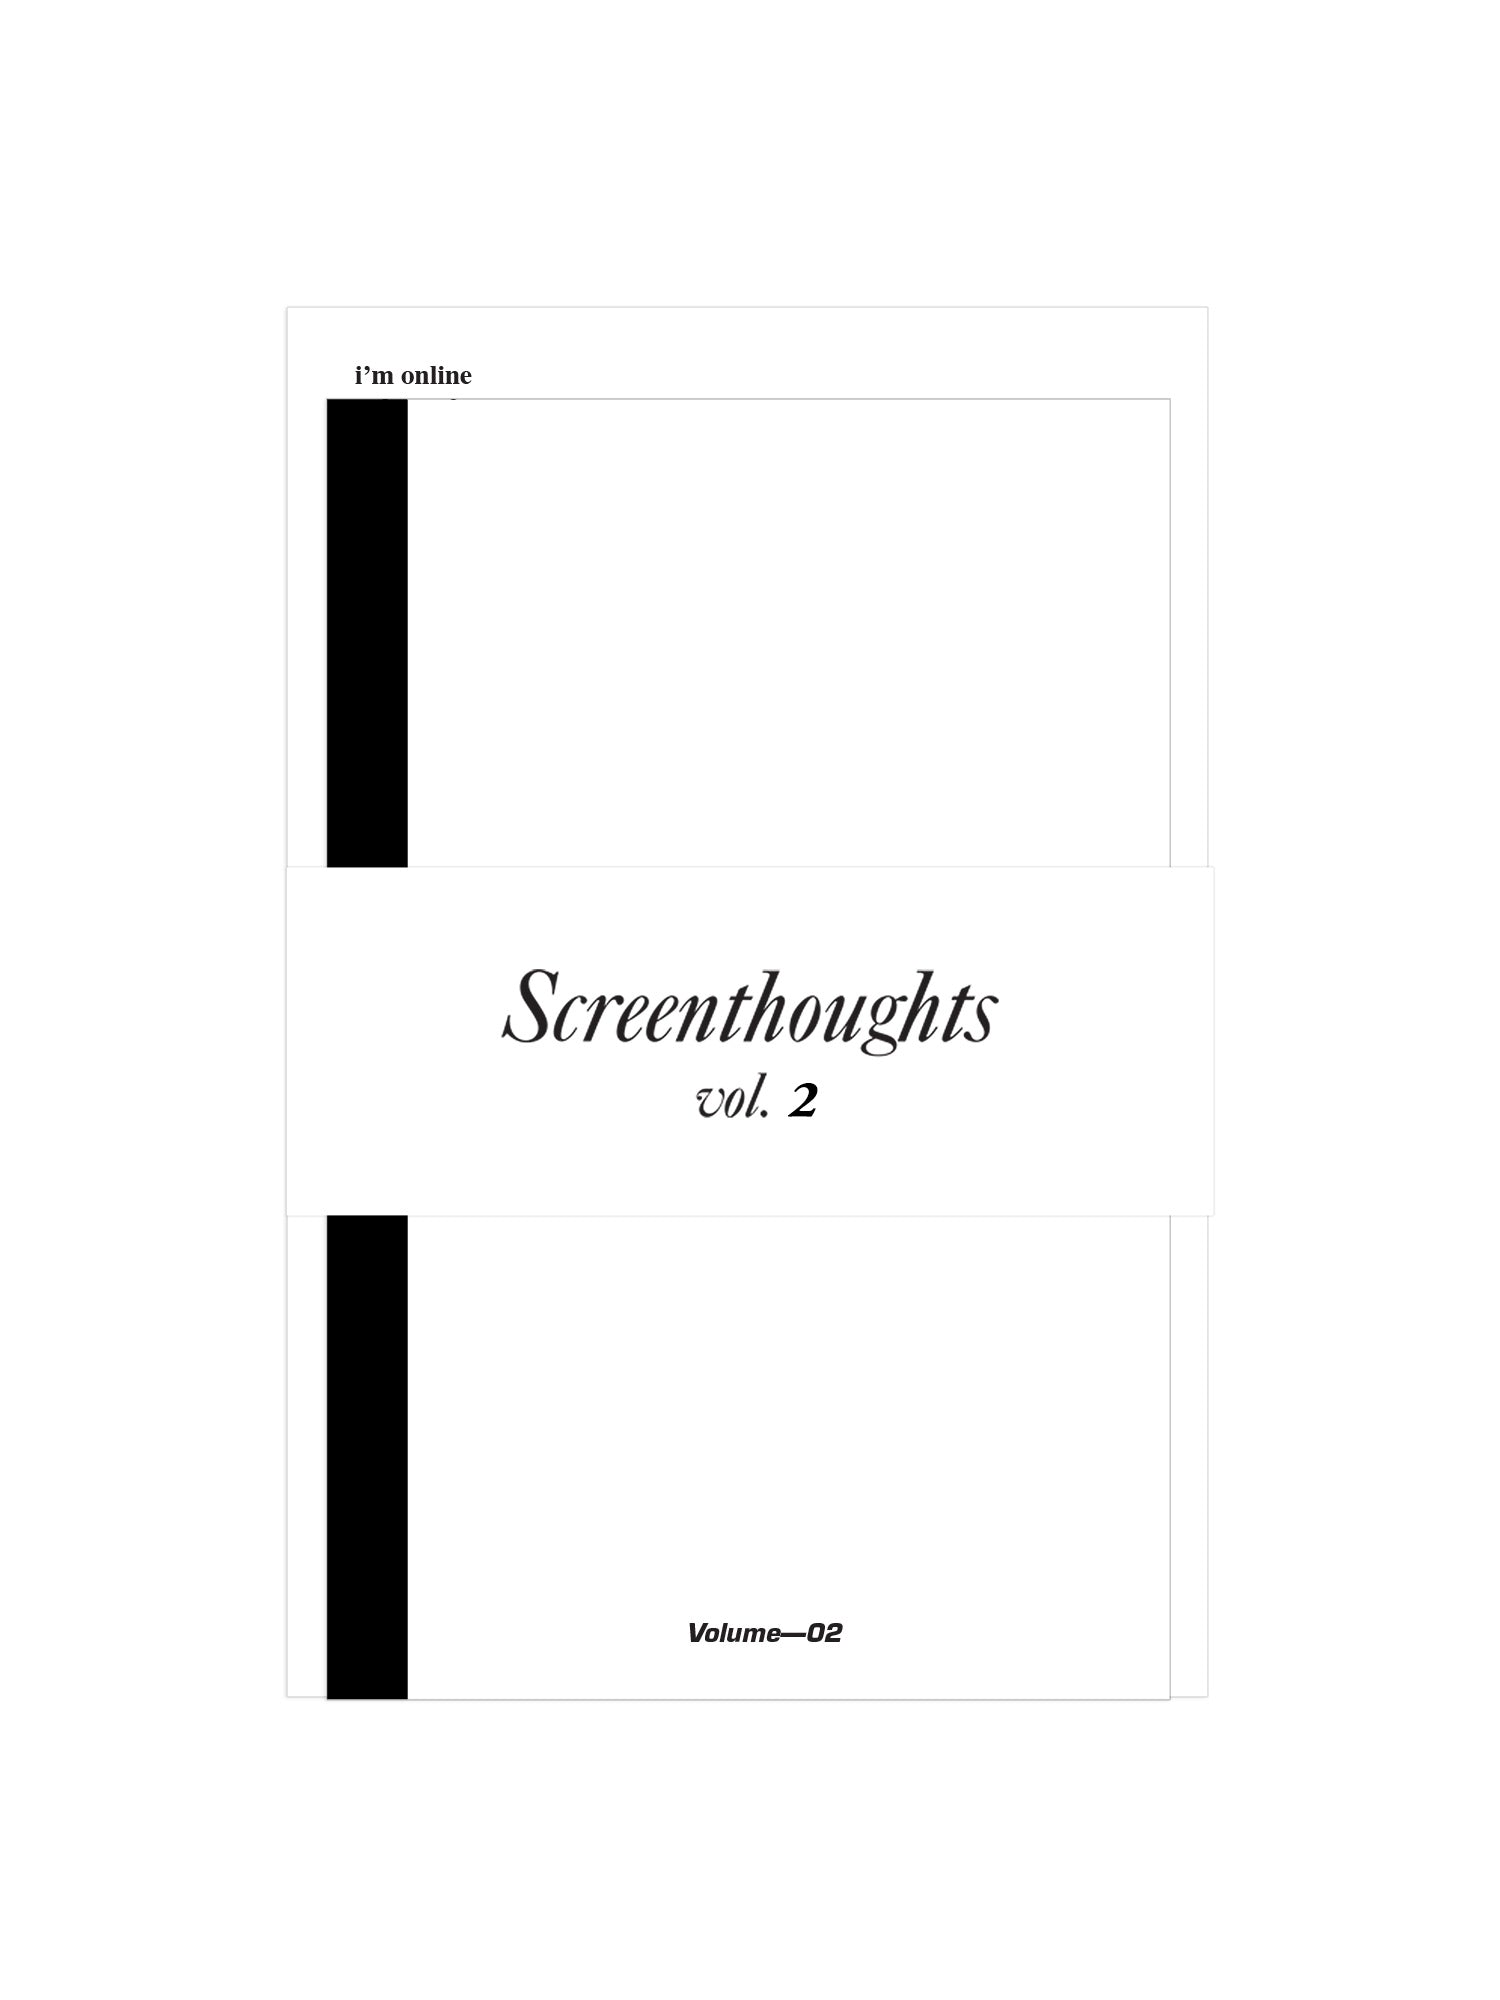 Screenthoughts, Volume 2